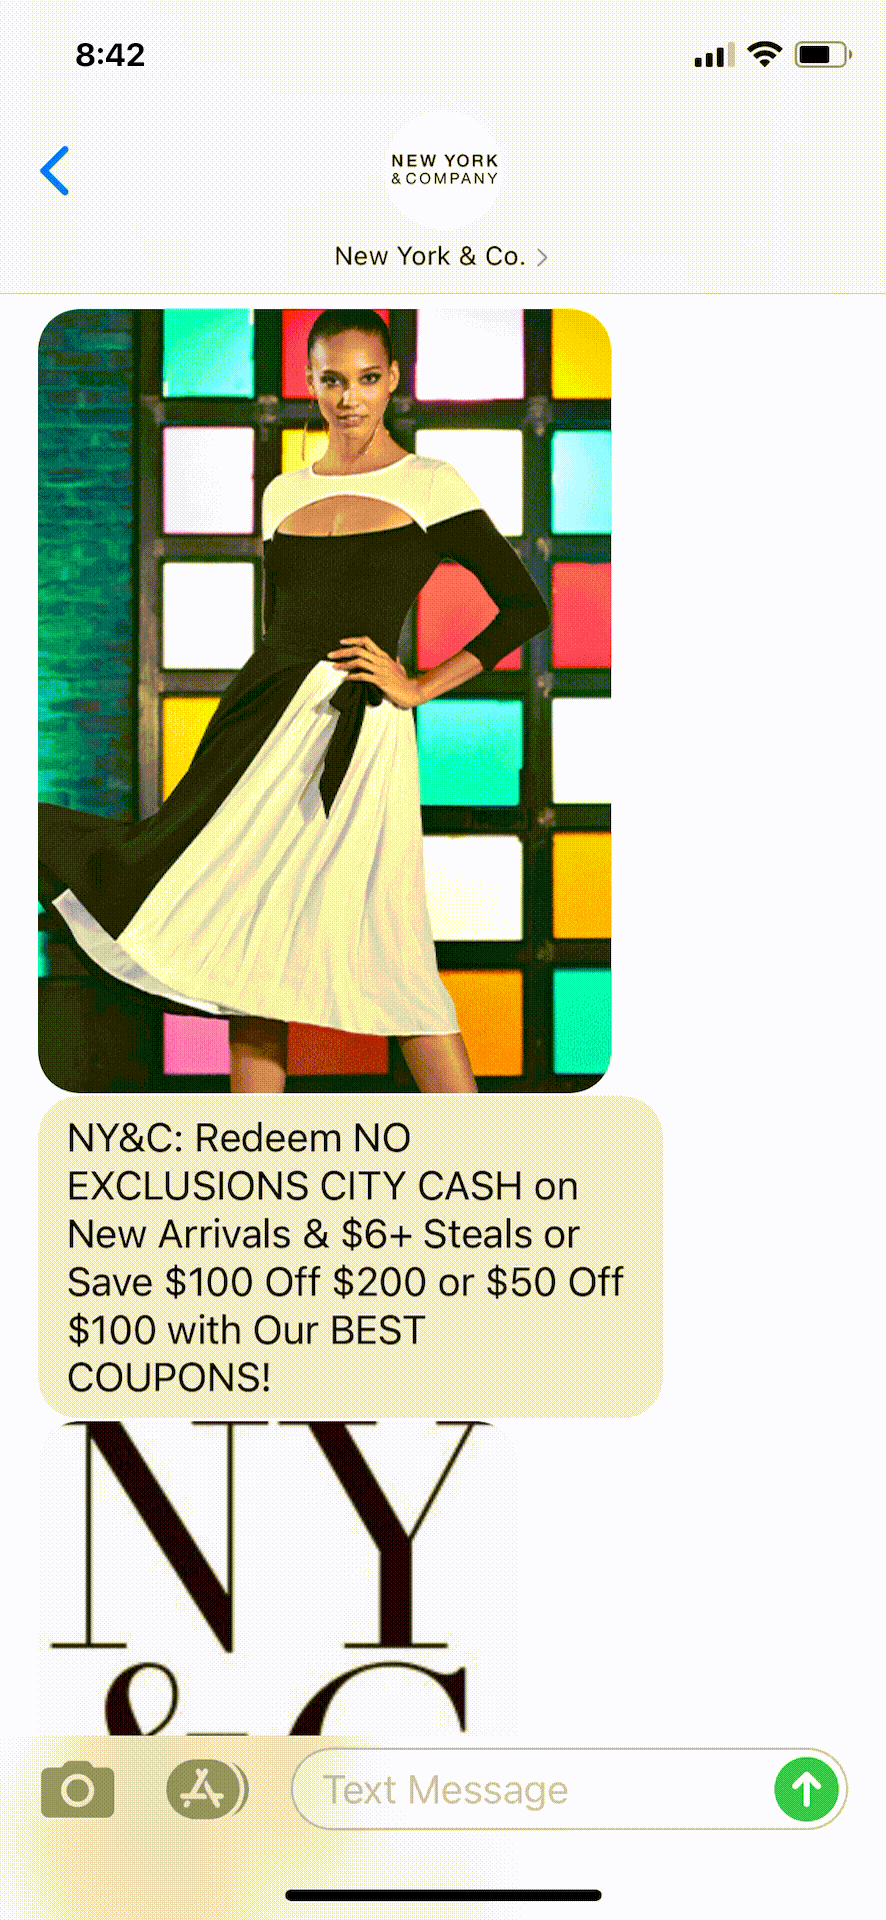 New-York-_-Co-Text-Message-Marketing-Example-04.17.2021